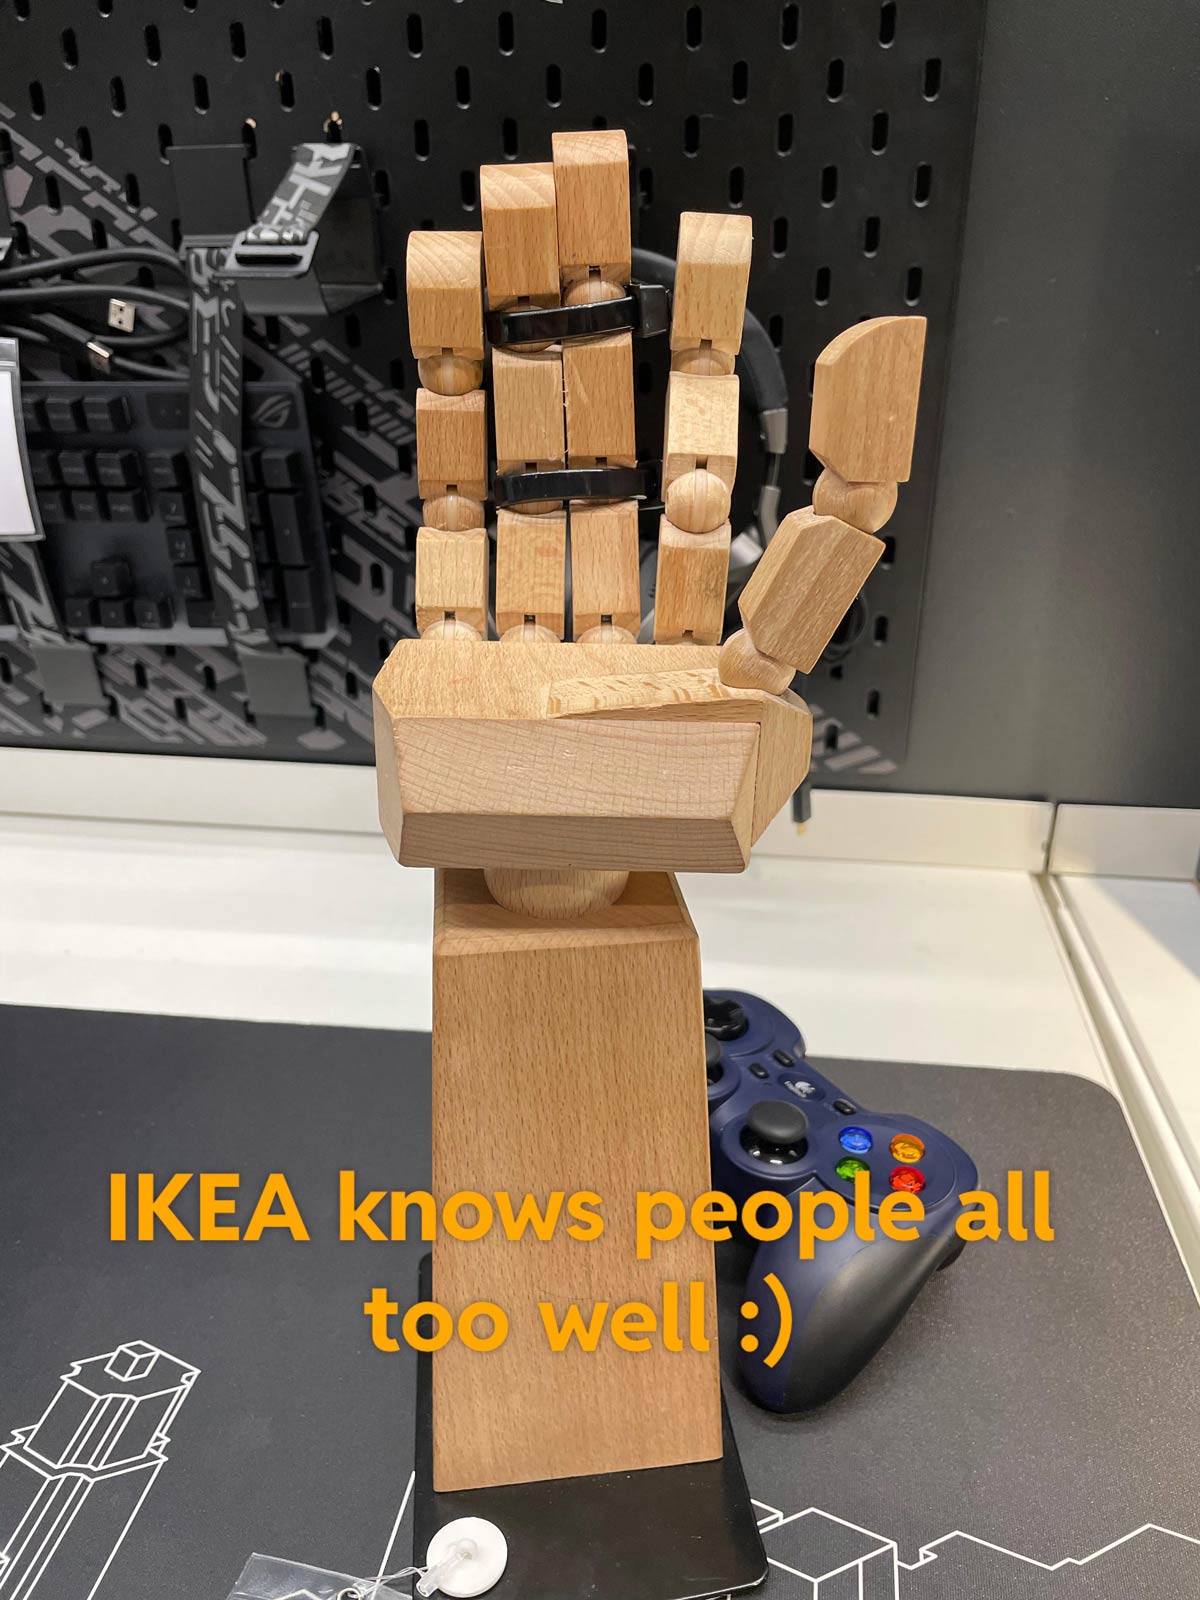 Recent modification at the local IKEA store